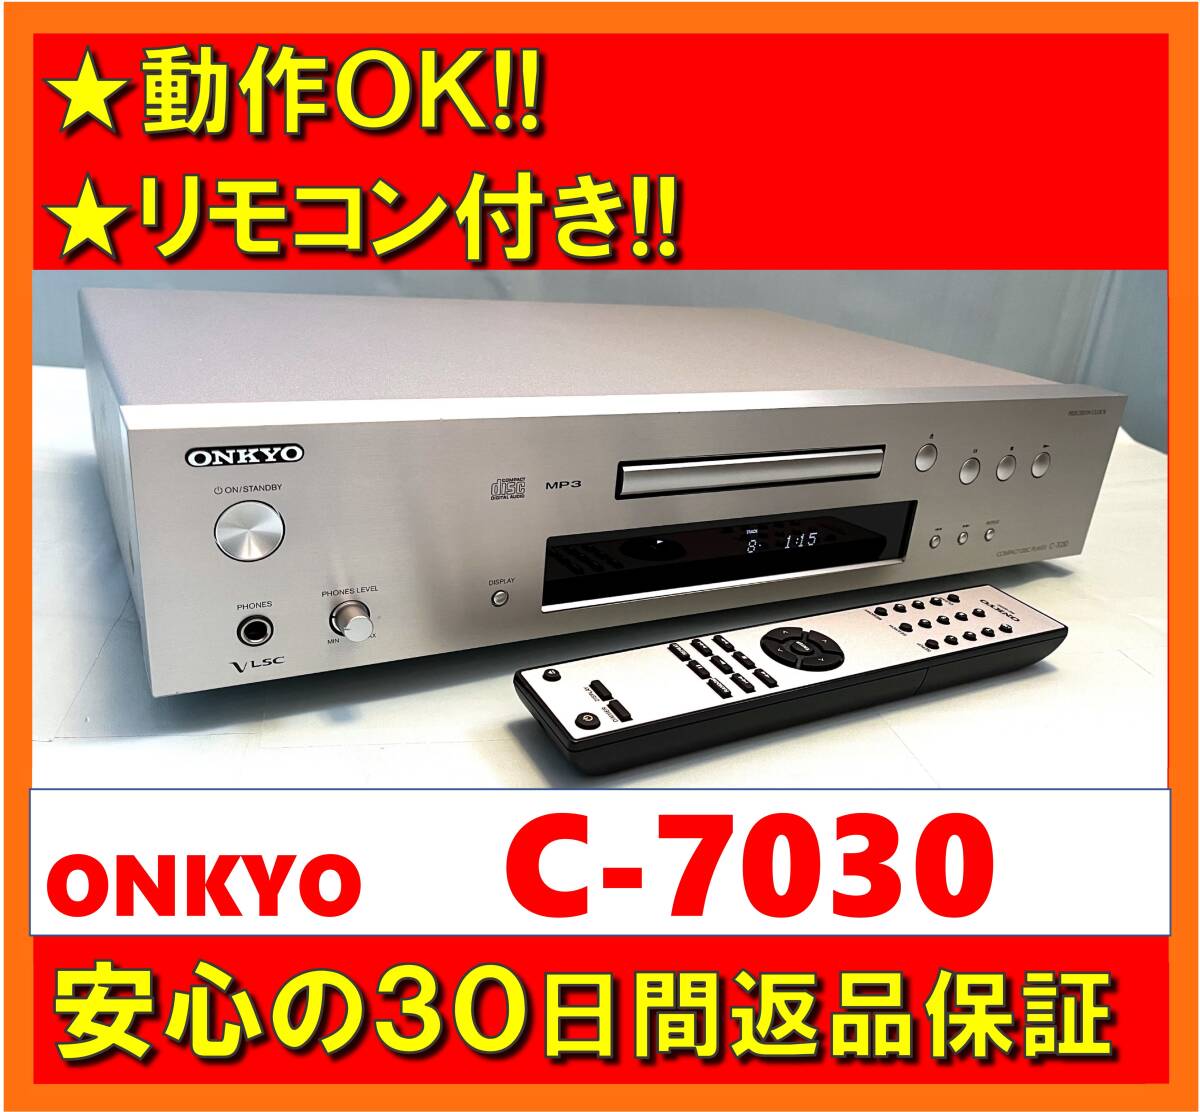 [ operation OK|30 days returned goods guarantee ] remote control attaching!! CD player ONKYO Onkyo C-7030 silver 